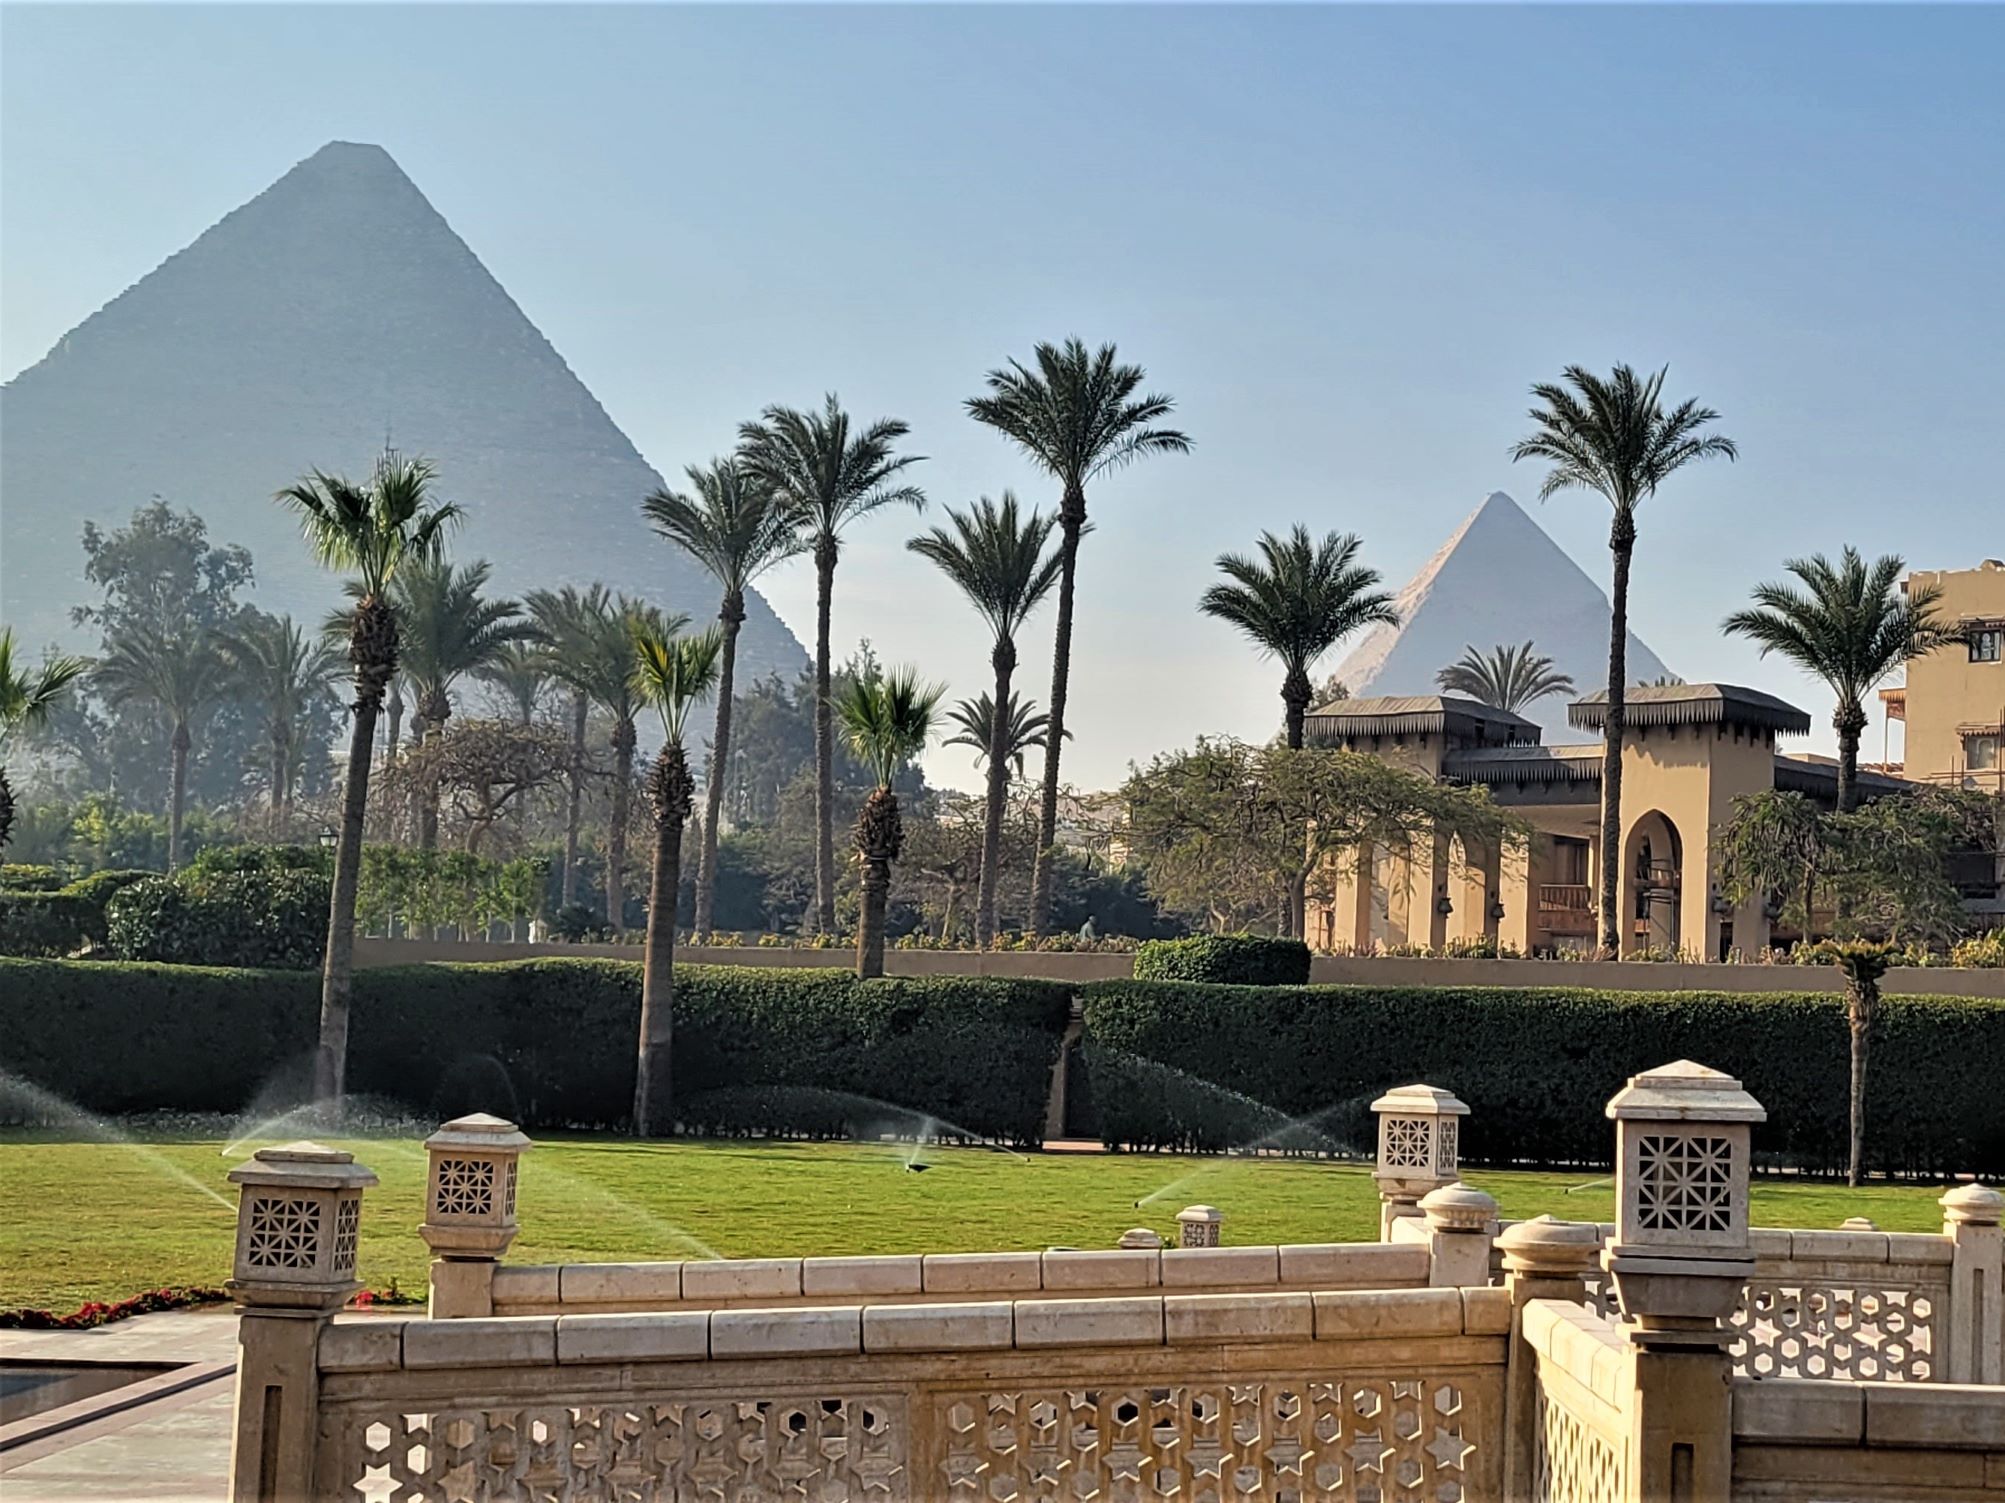 View of the Pyramids of Giza rom the Mena House hotel